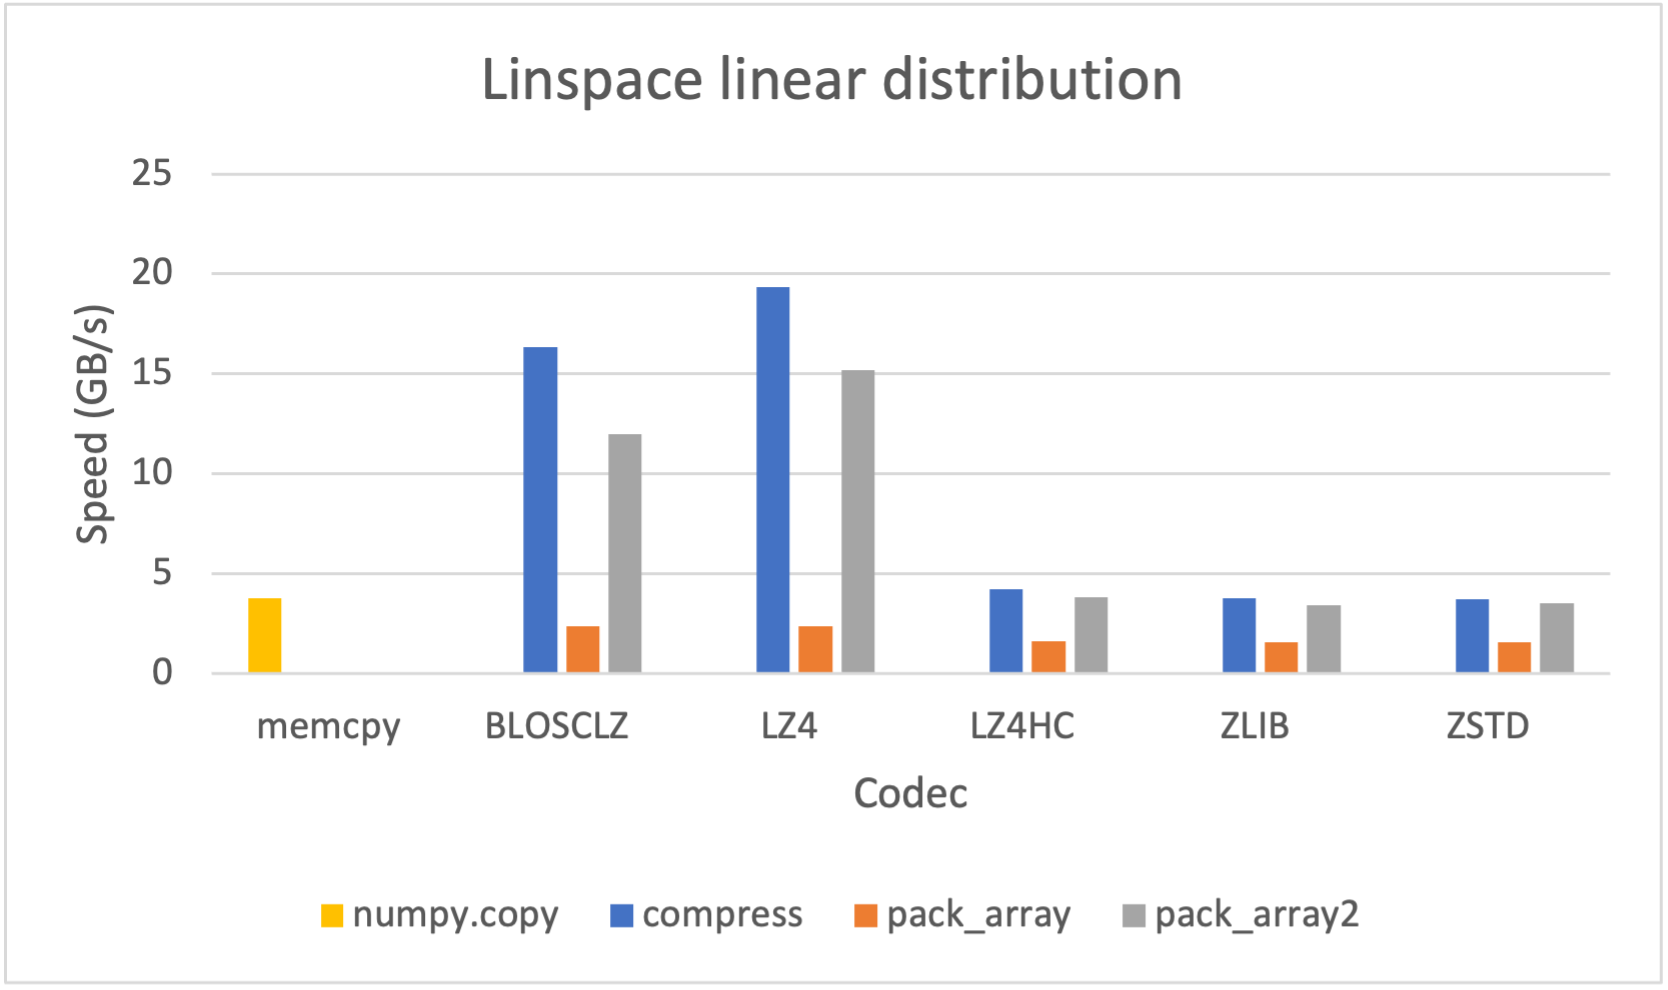 Compression speed for different codecs